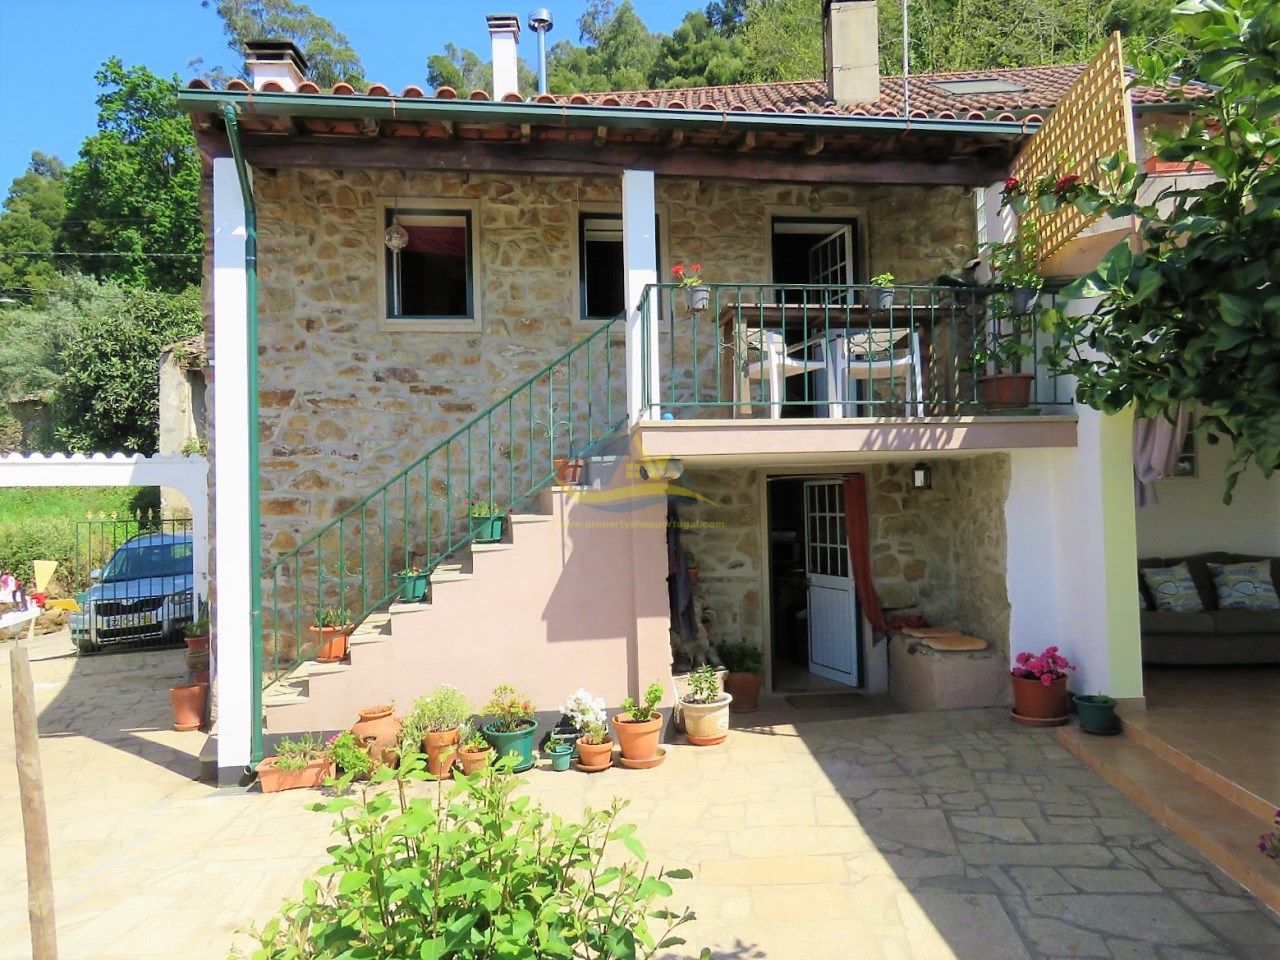 Traditional stone constructed 3 bedroom property located in a quiet hamlet not far from the town of Miranda do Corvo in the district of Coimbra. Miranda do Corvo